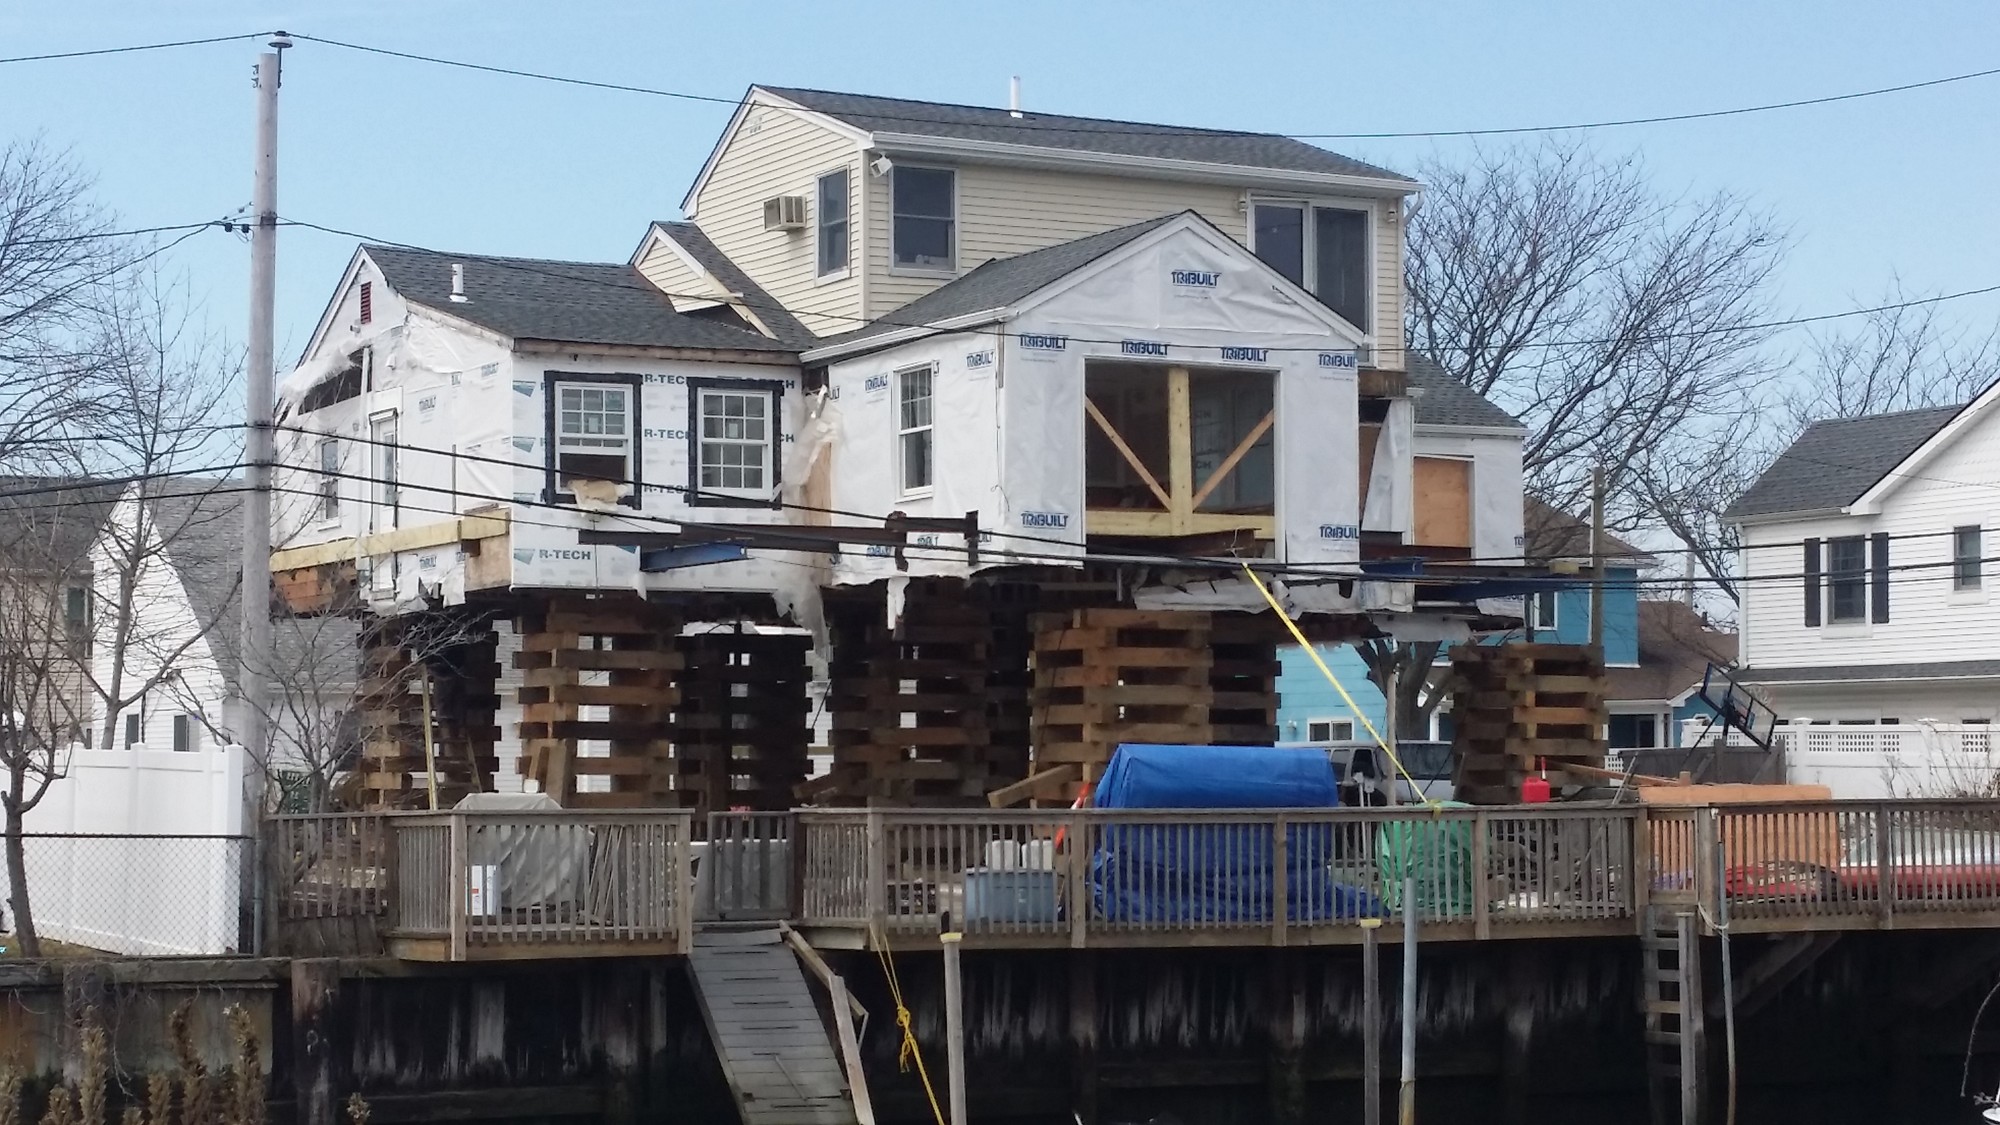 Hurricane Sandy ripped through Long Beach on Oct. 29, 2012. Now hundreds of homes in the city, such as this canal-front property, are being raised.